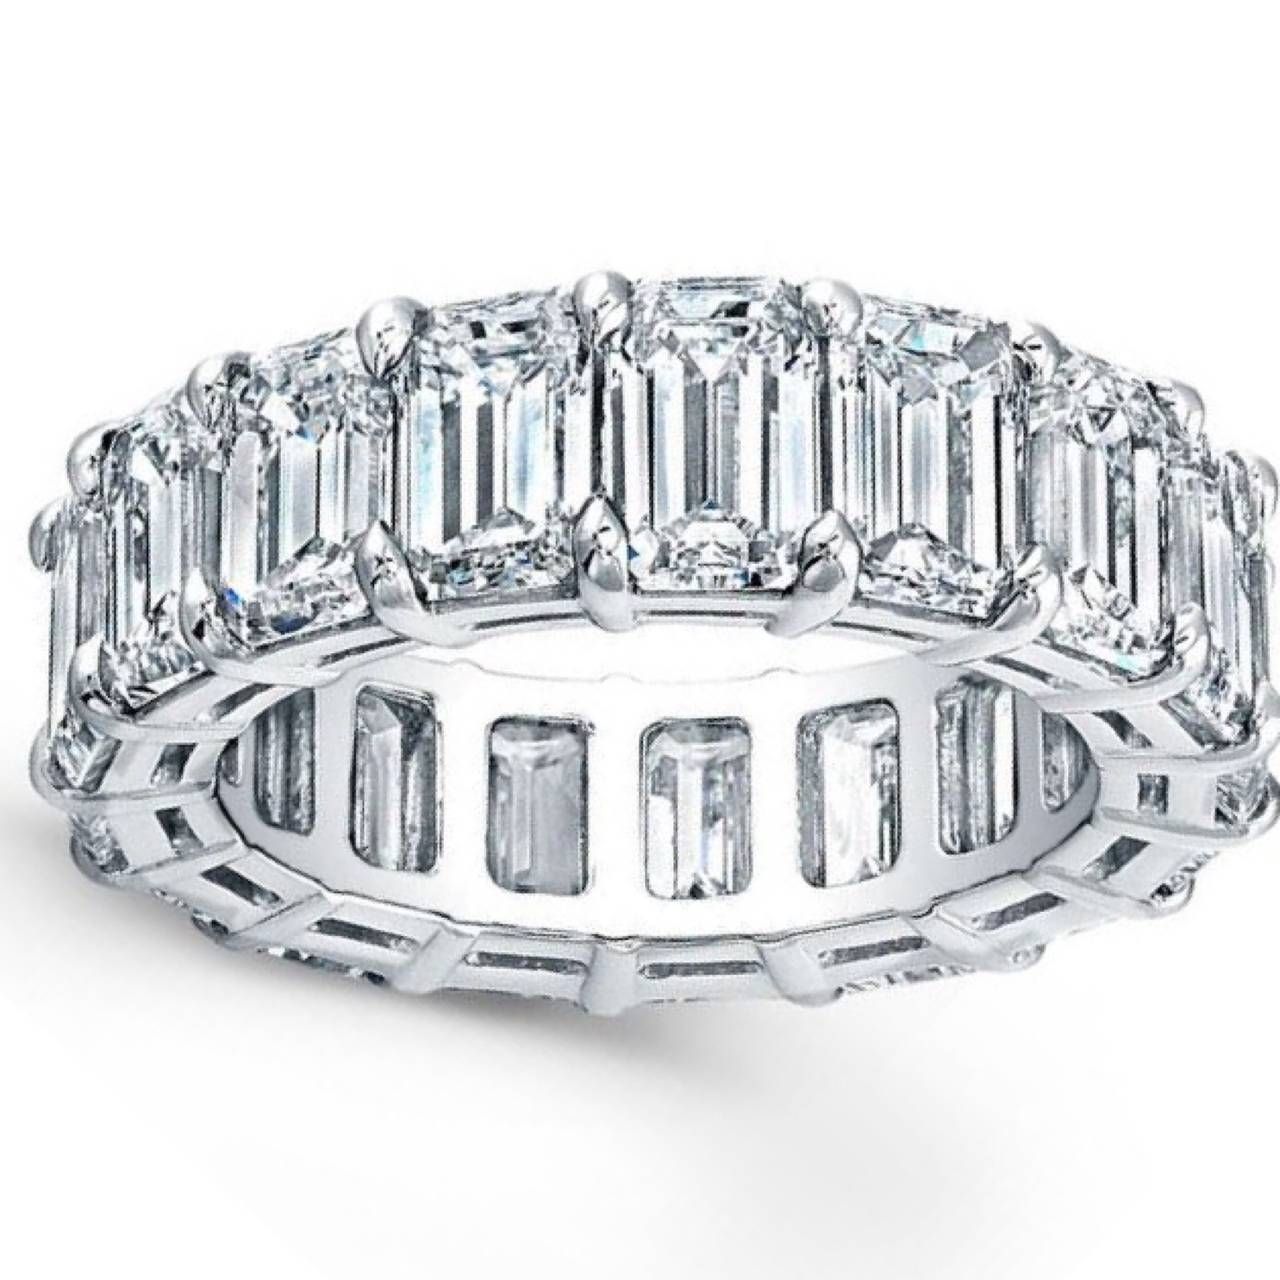 Emerald Cut Diamond Platinum Eternity Anniversary Band Ring At 1stdibs Within Most Current Emerald Cut Diamond Anniversary Rings (View 11 of 25)